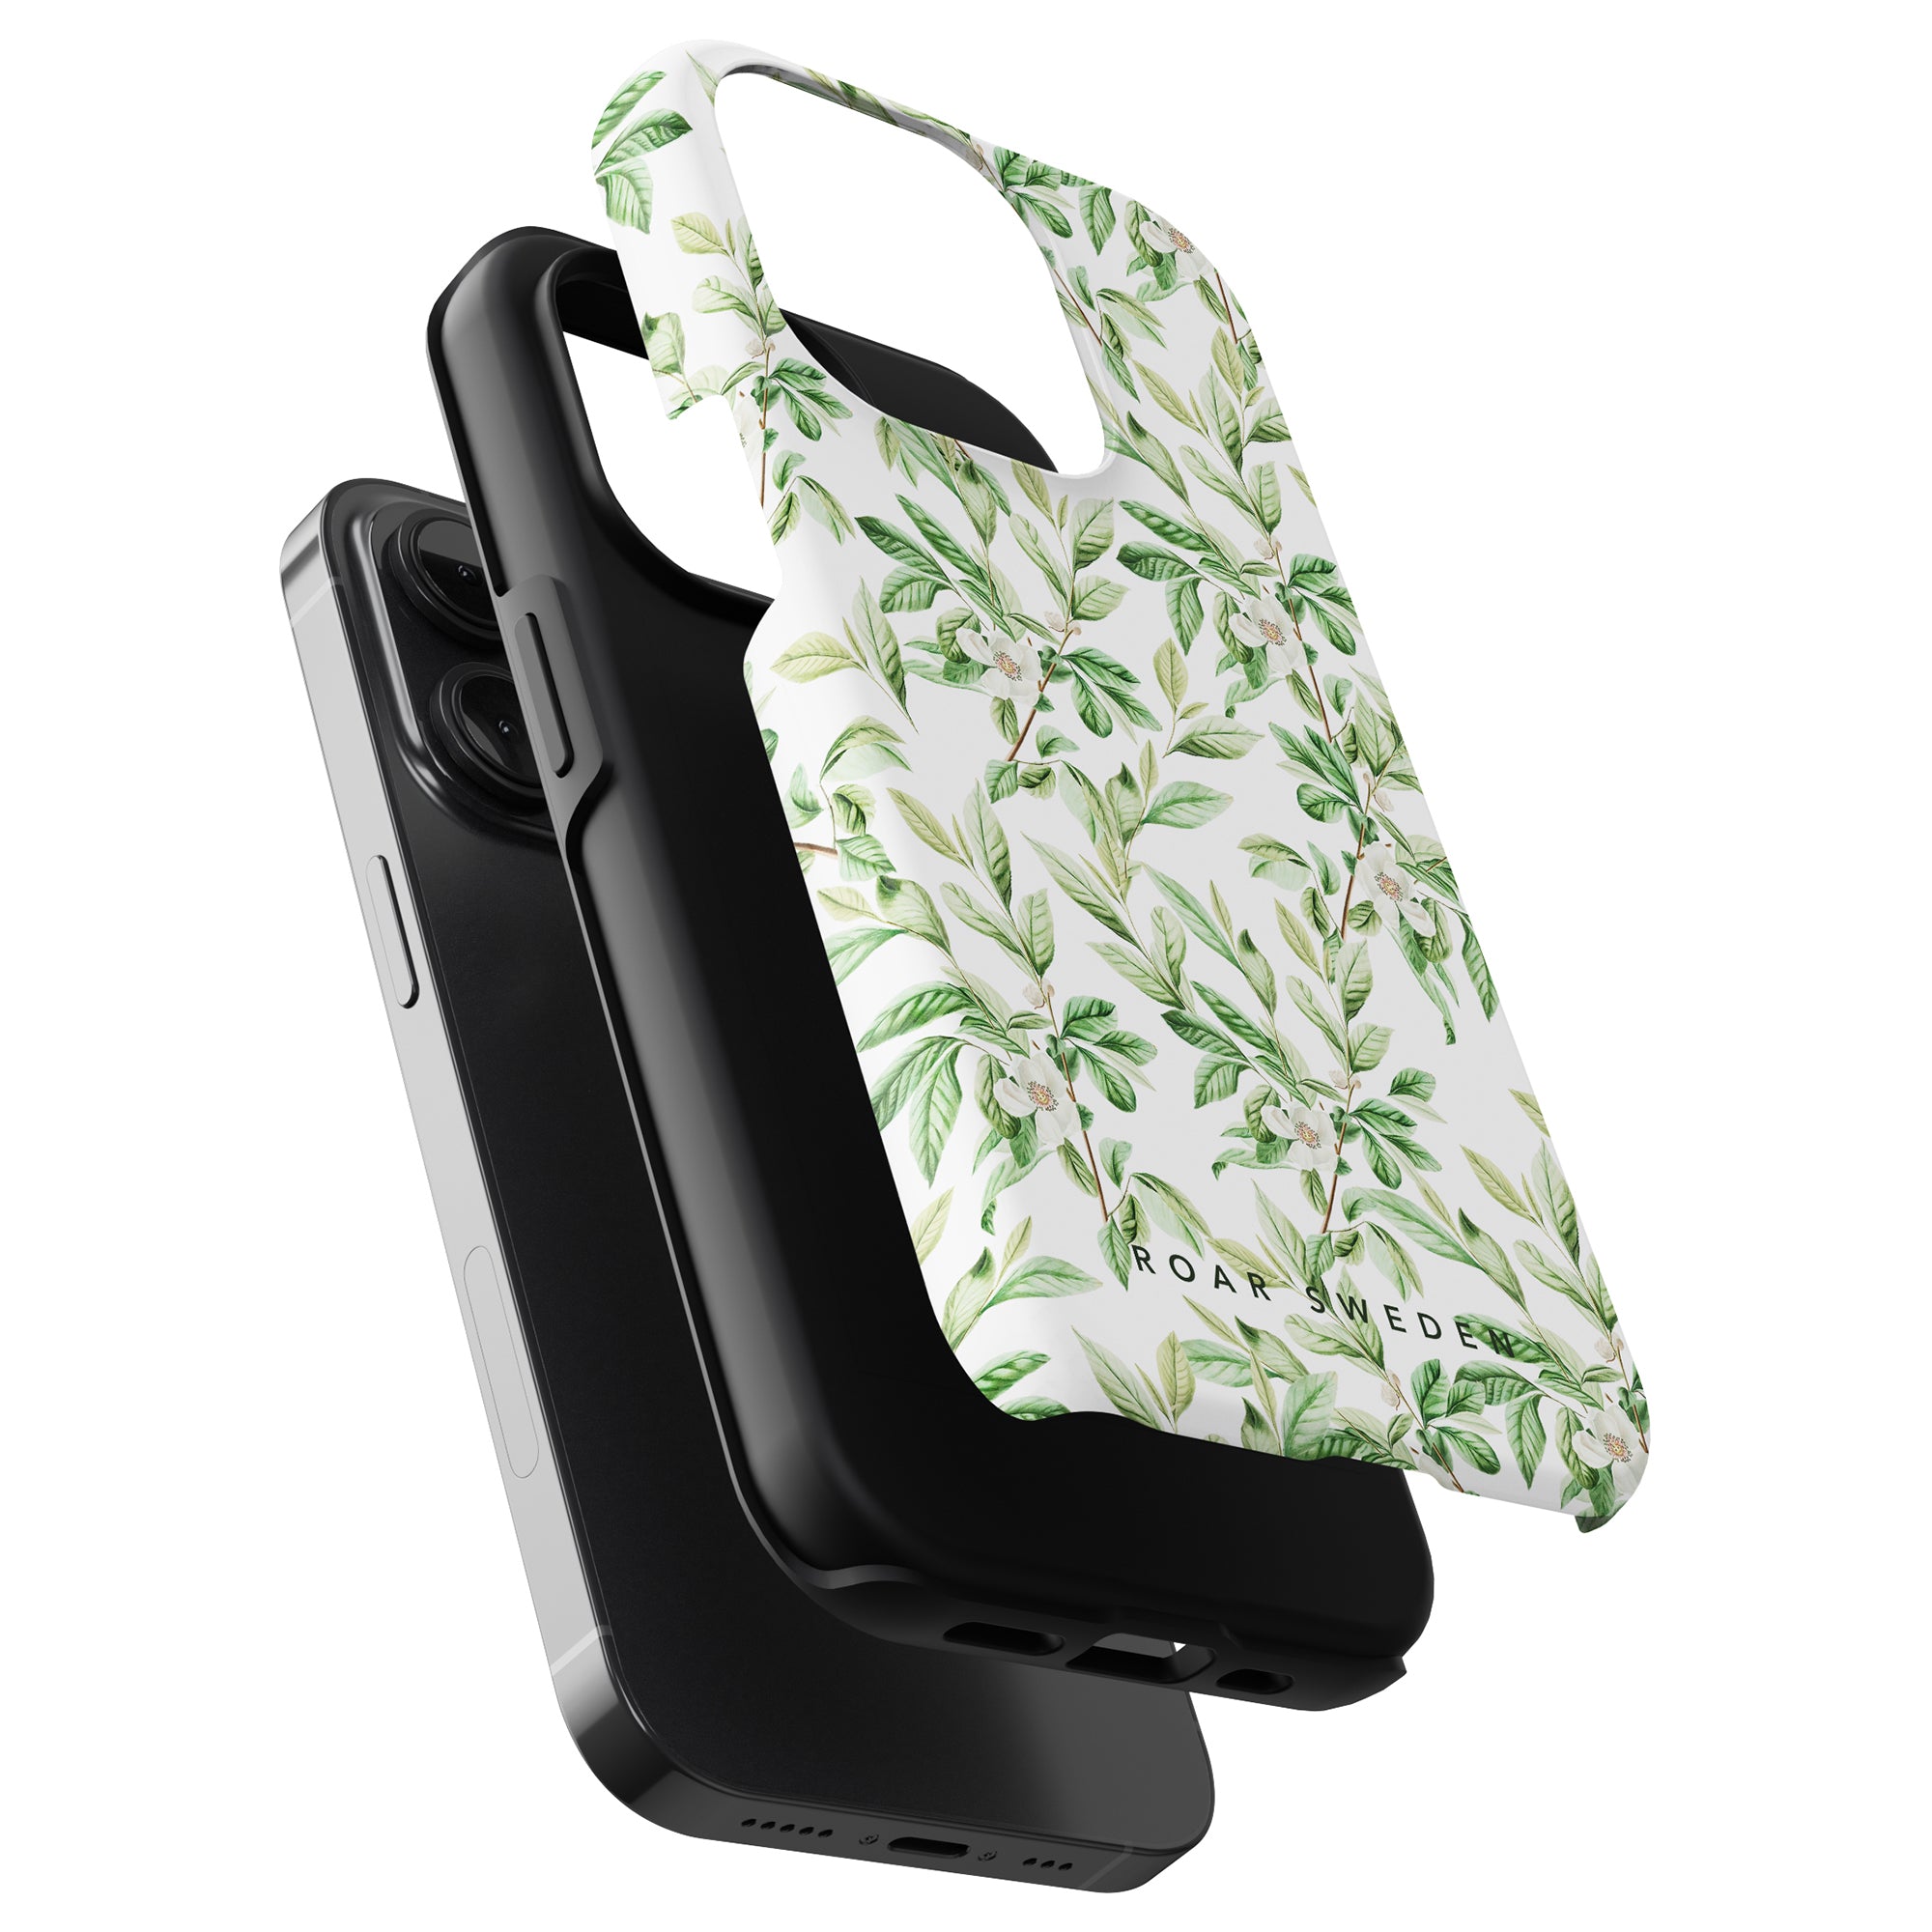 Two smartphones in tough cases, one with a Spring Leaves - Tough Case design, positioned back-to-back against a white background.